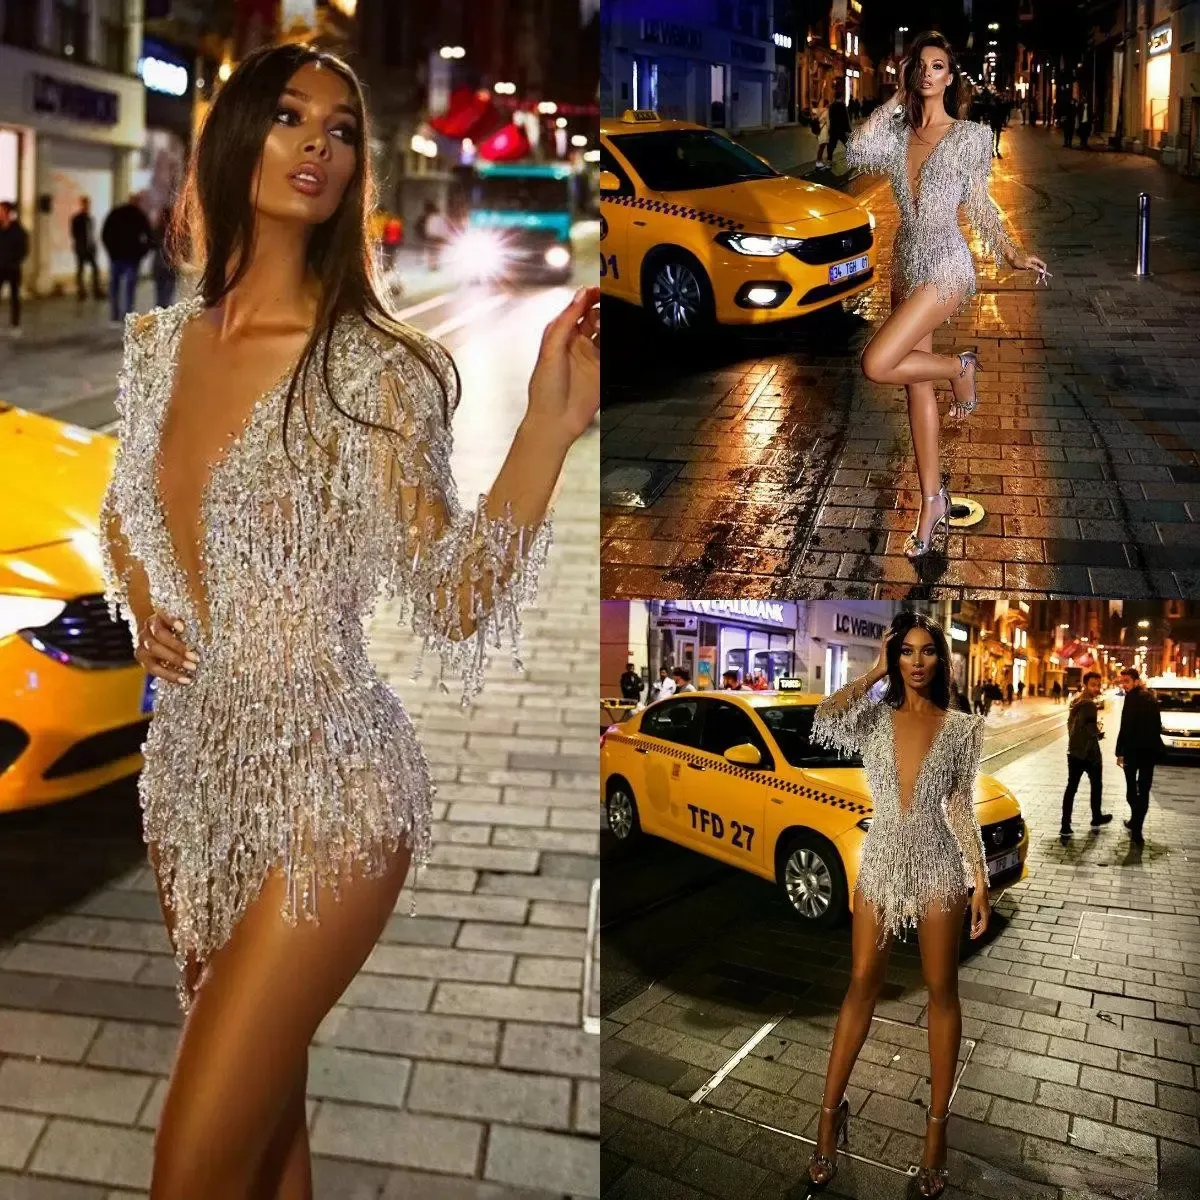 Long Sleeve 2022 Cocktail Dresses Sexy Short Deep V Neck Crystal Beads Prom Dress See Through Sexy Mini Evening Gowns CG001